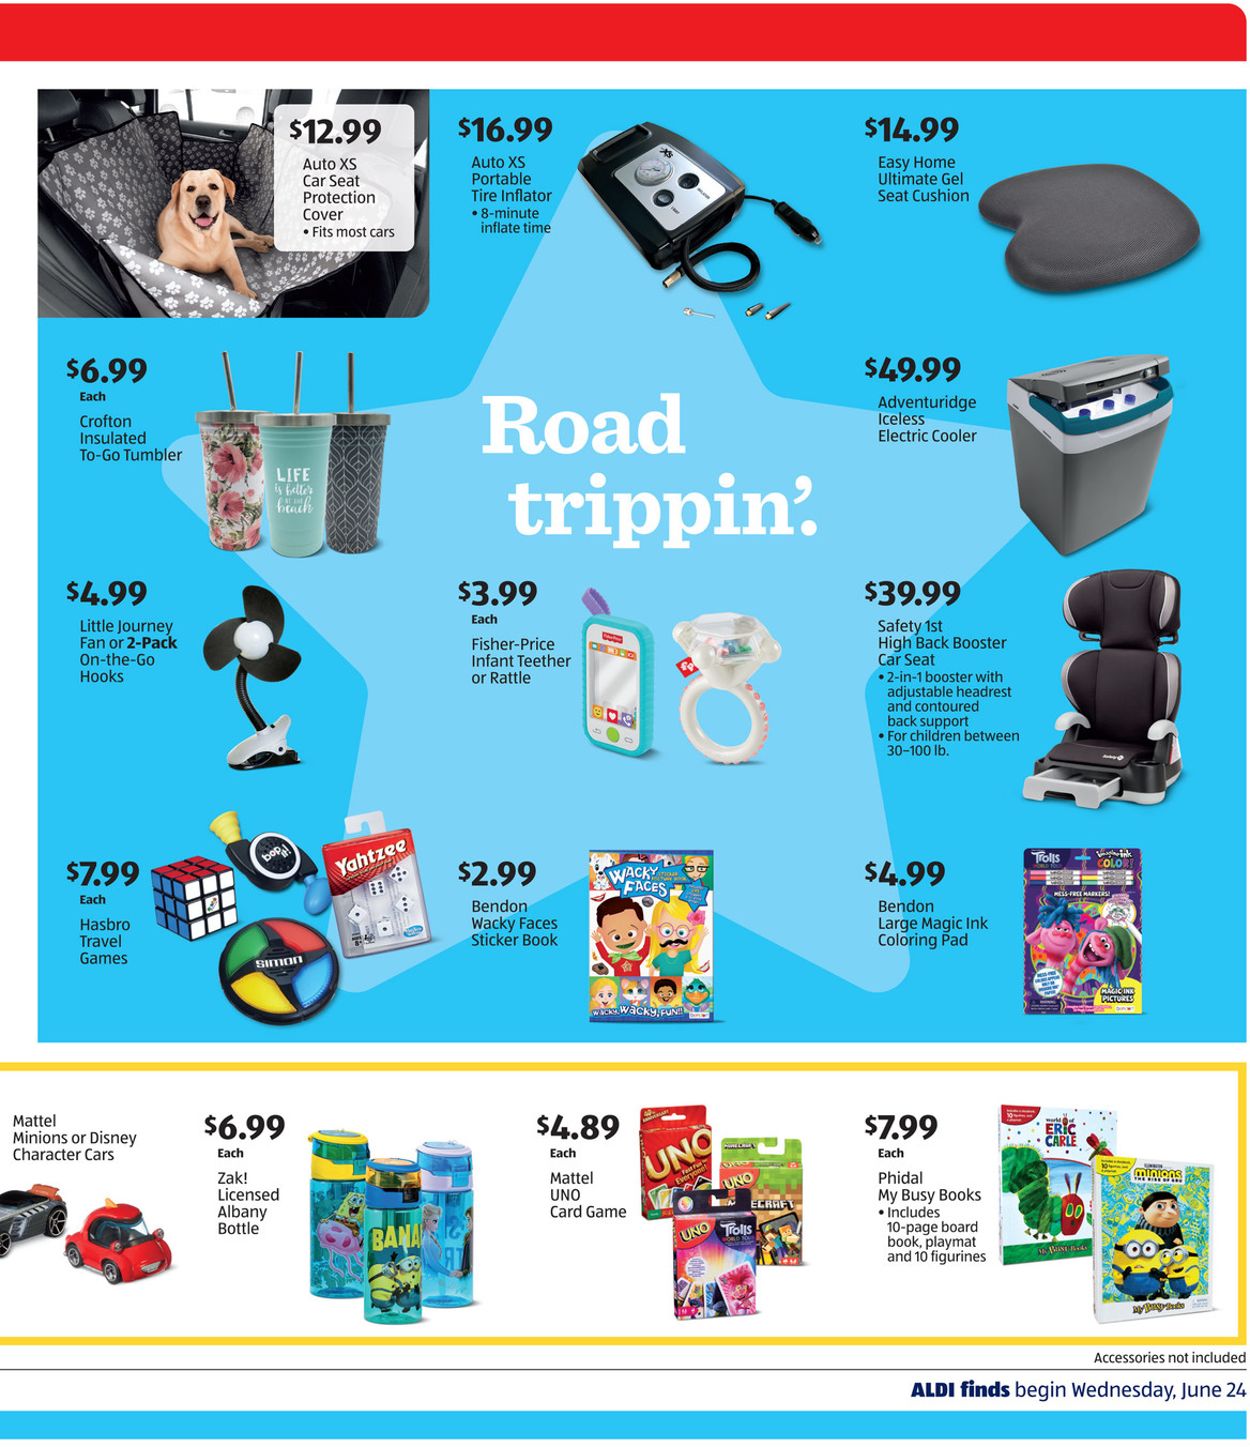 ALDI Current weekly ad 06/24 - 06/30/2020 [3] - frequent-ads.com